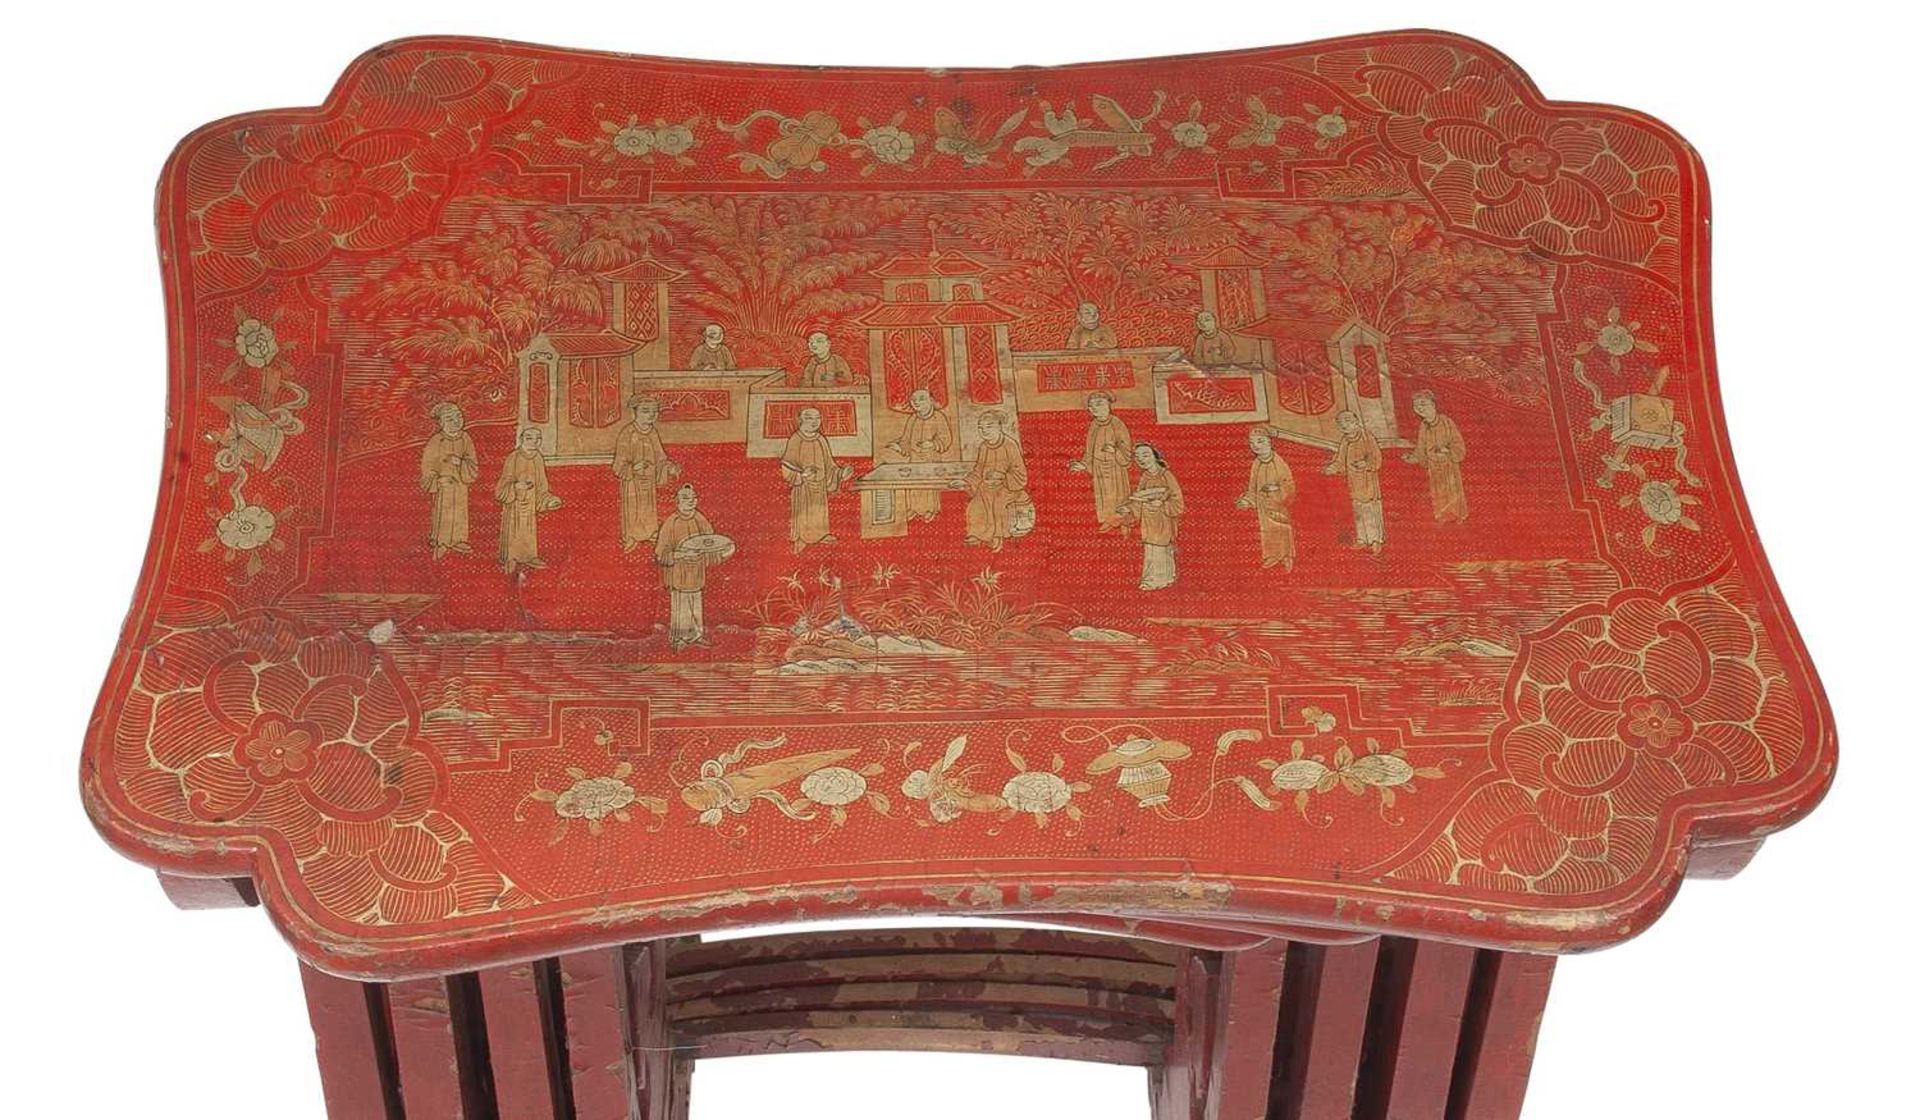 A 19TH CENTURY CHINESE RED LACQUERED AND GILT DECORATED NEST OF TABLES - Image 2 of 2